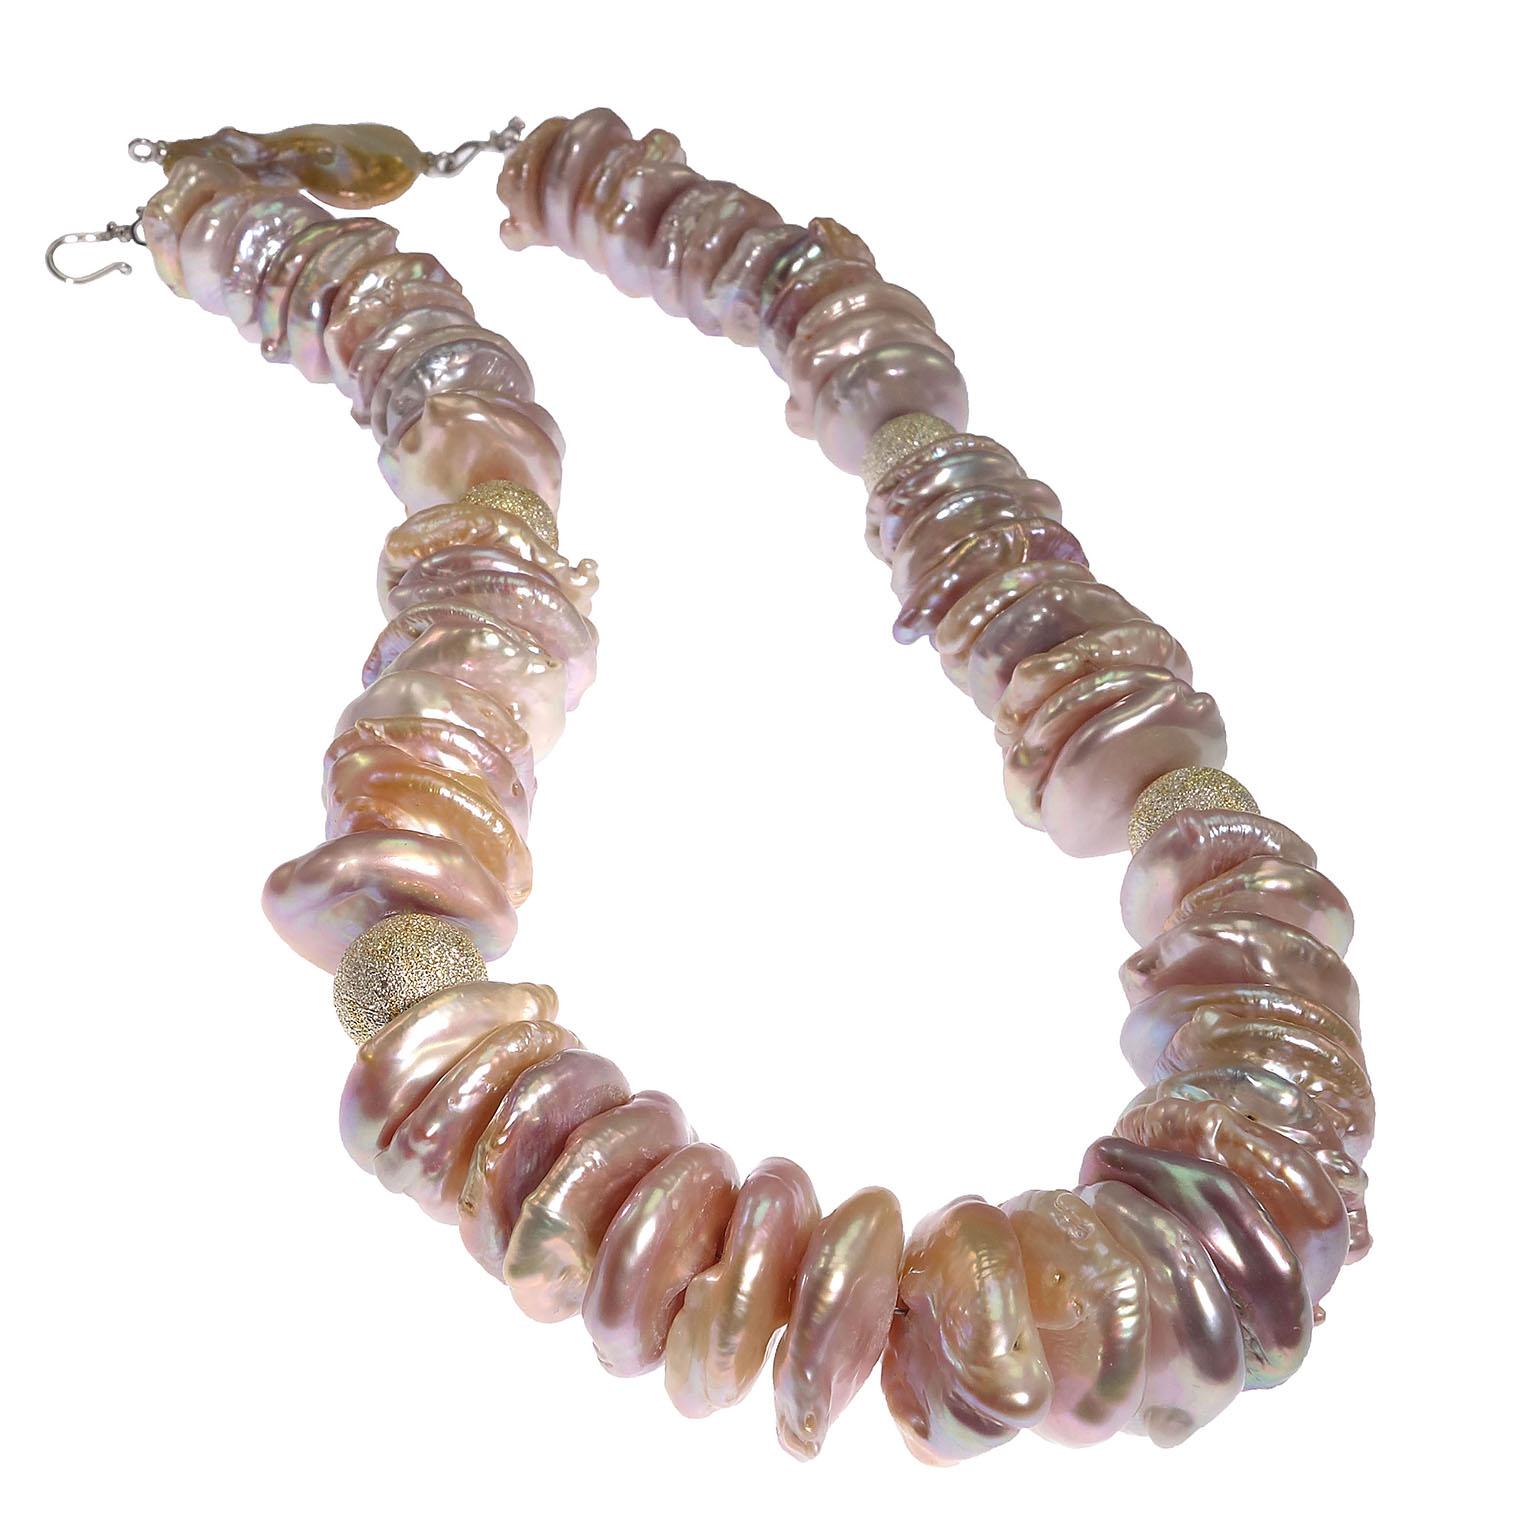 'Pearls are always appropriate' Jackie Kennedy

Custom made center drilled iridescent Coin Pearl necklace with baroque pearl clasp and sparkling gold and silver ball accents. These 18MM glowing Coin Pearls are various shades of pink, mauve, peach,